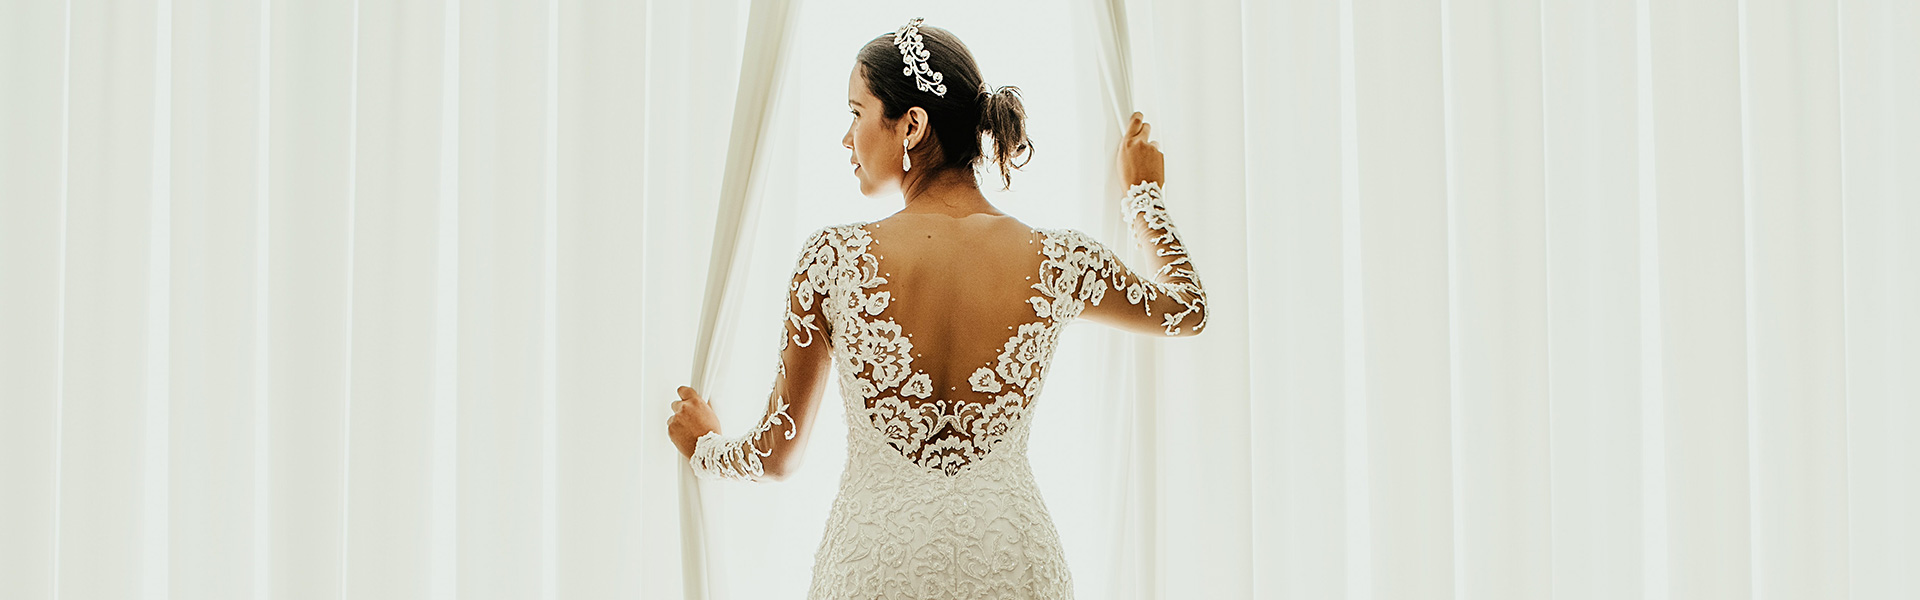 Gorgeous bride in long sleeved gown opening window